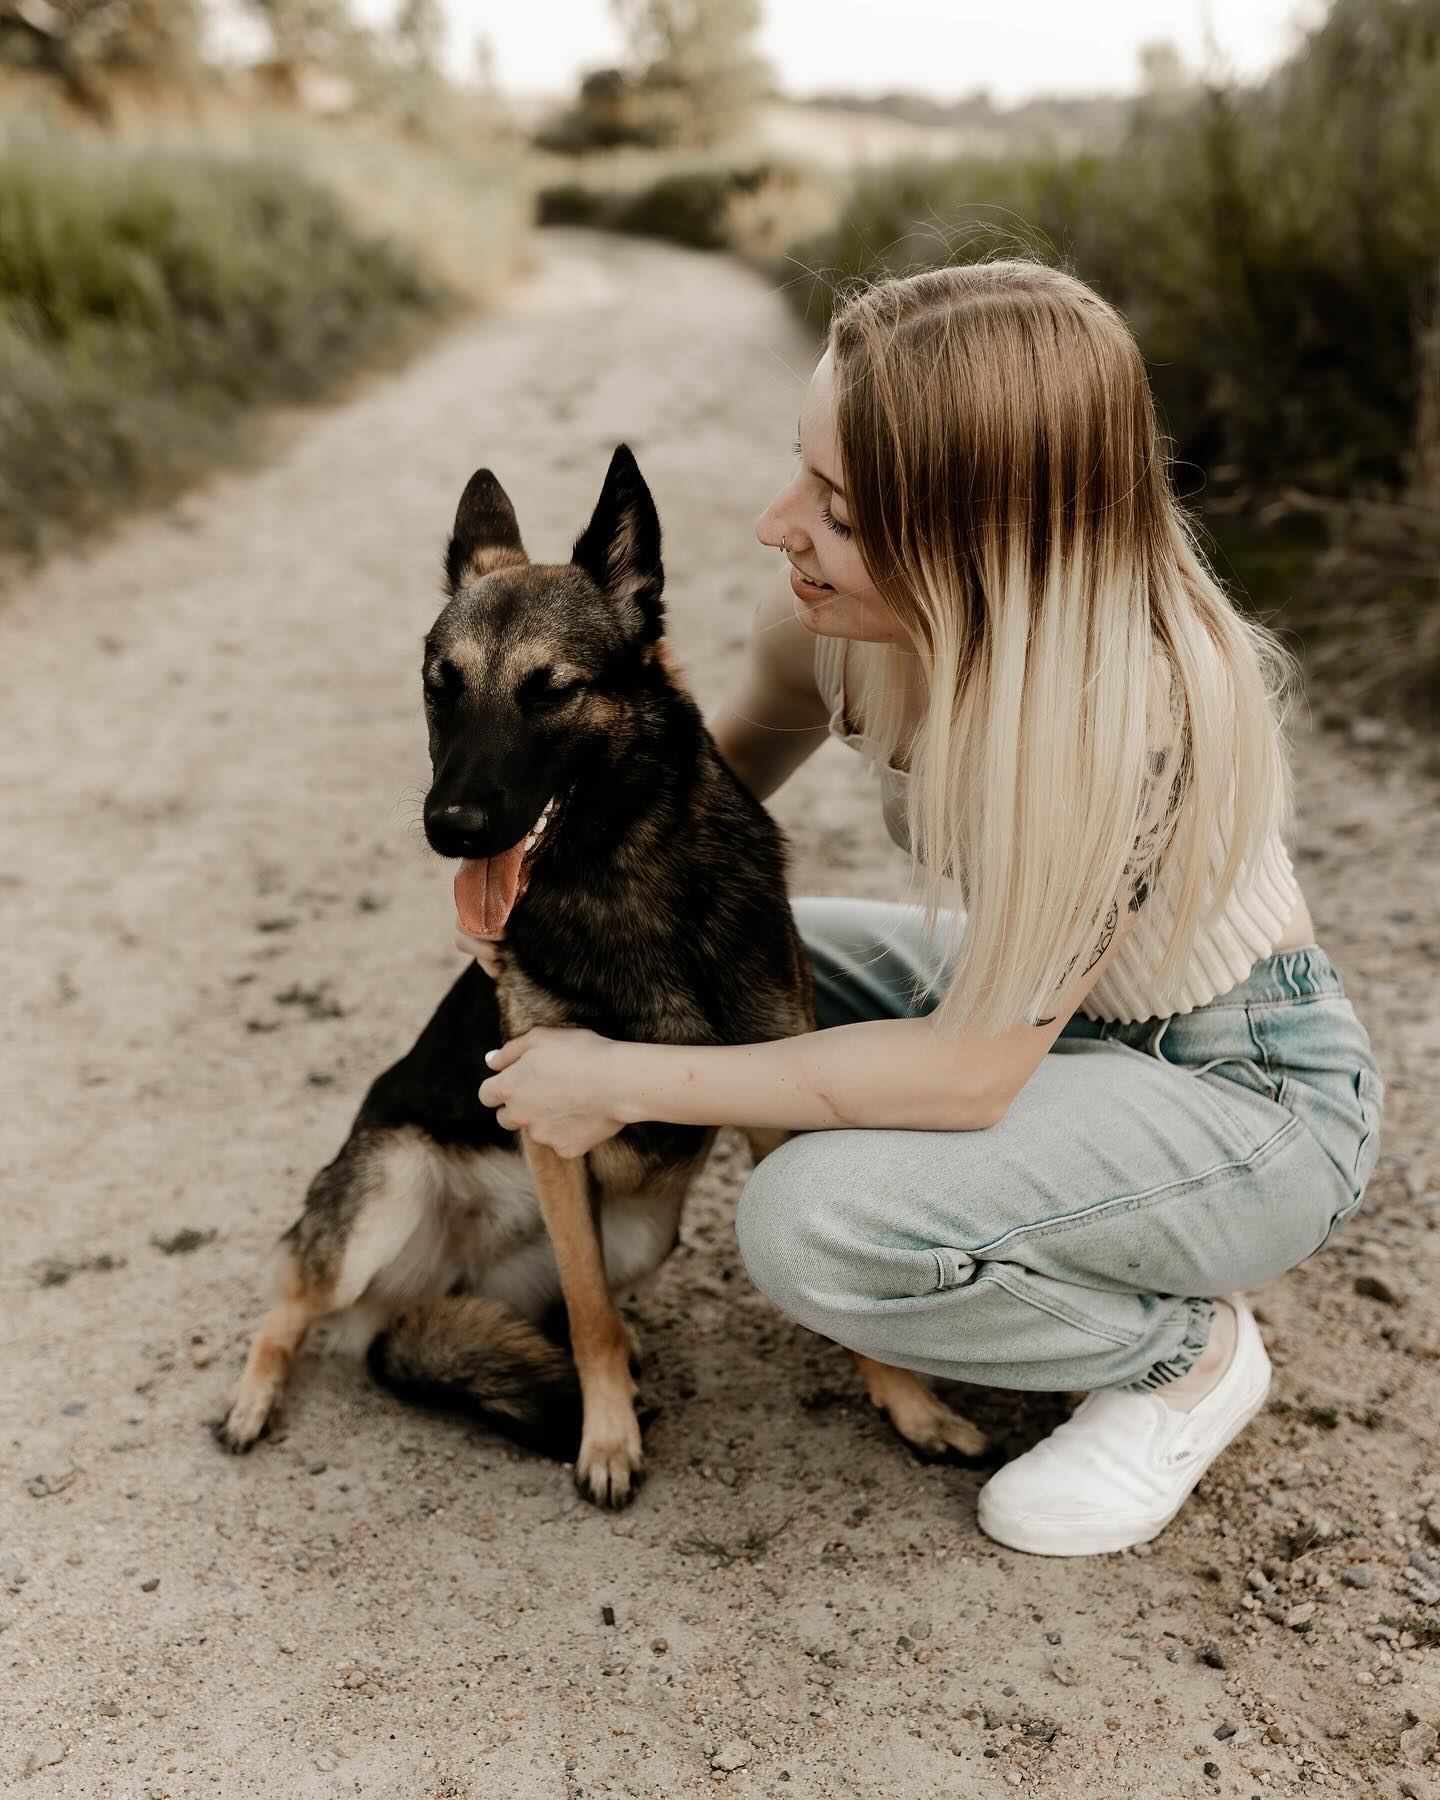 Just a girl and her girl ✨

When I adopted my very first malinois- Addika, I had huge plans. She was so unique, strong & independent. Sadly after two weeks, I lost that sweet girl to a hit and run. 2 years ago this month I lost that sweet angel. 

Today, I have a beautiful bright eyed girl named Aliya. Aliya is smart, loyal, sweet & gentle. She is Addika’s blood related sister. 

Today I appreciate her, for her being my partner, protector and friend. She is so much different than my first malinois, but I wouldn’t trade her for anything.

Everything plays out in the way it’s meant to, and she was meant for me. ♡